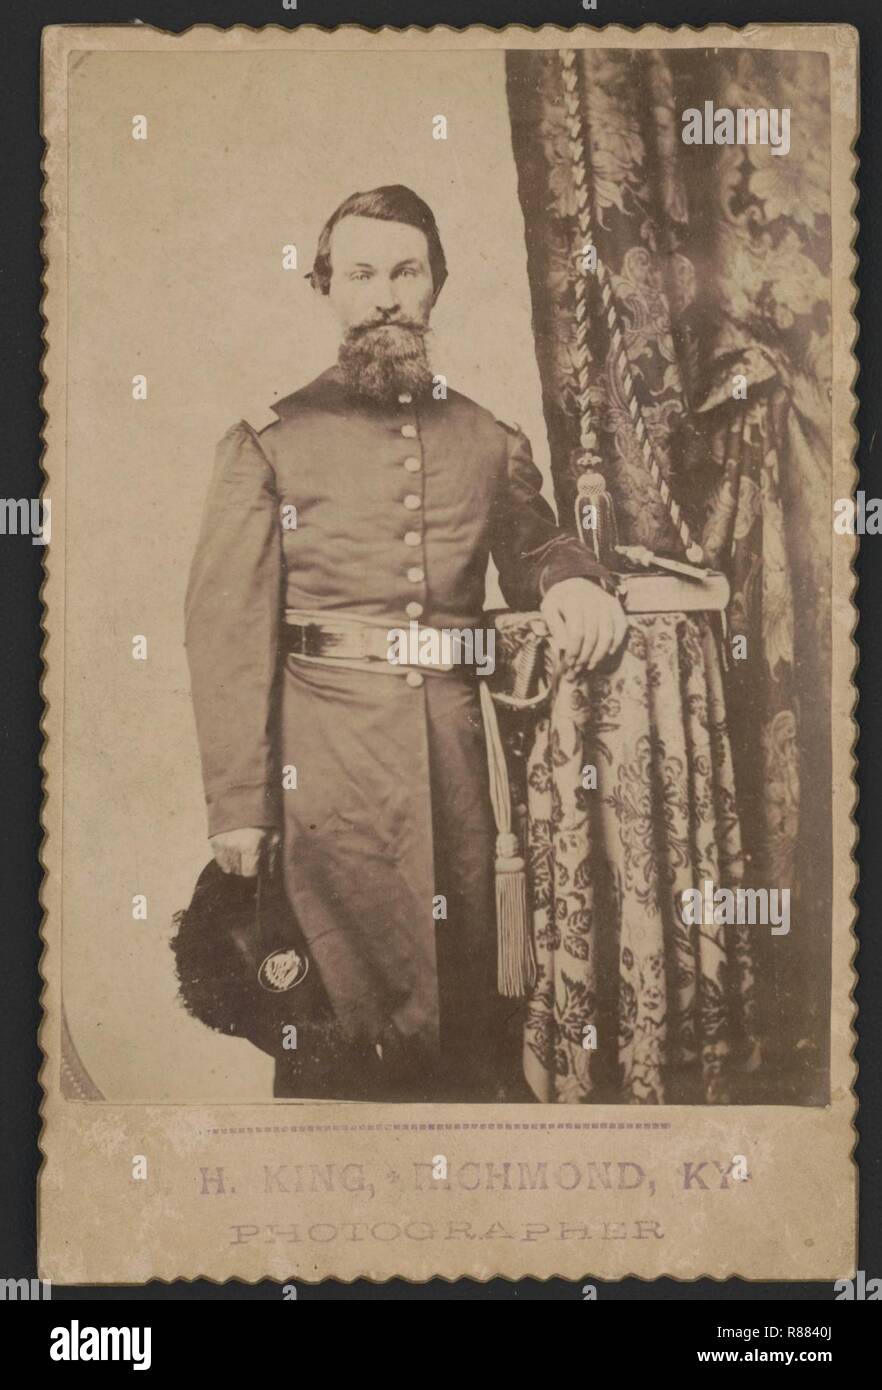 Captain John Wilson of Co. C, 8th Kentucky Infantry Regiment (Union), in uniform with sword; revolver and book rest on table) - H. King, Richmond, Ky., photographer Stock Photo